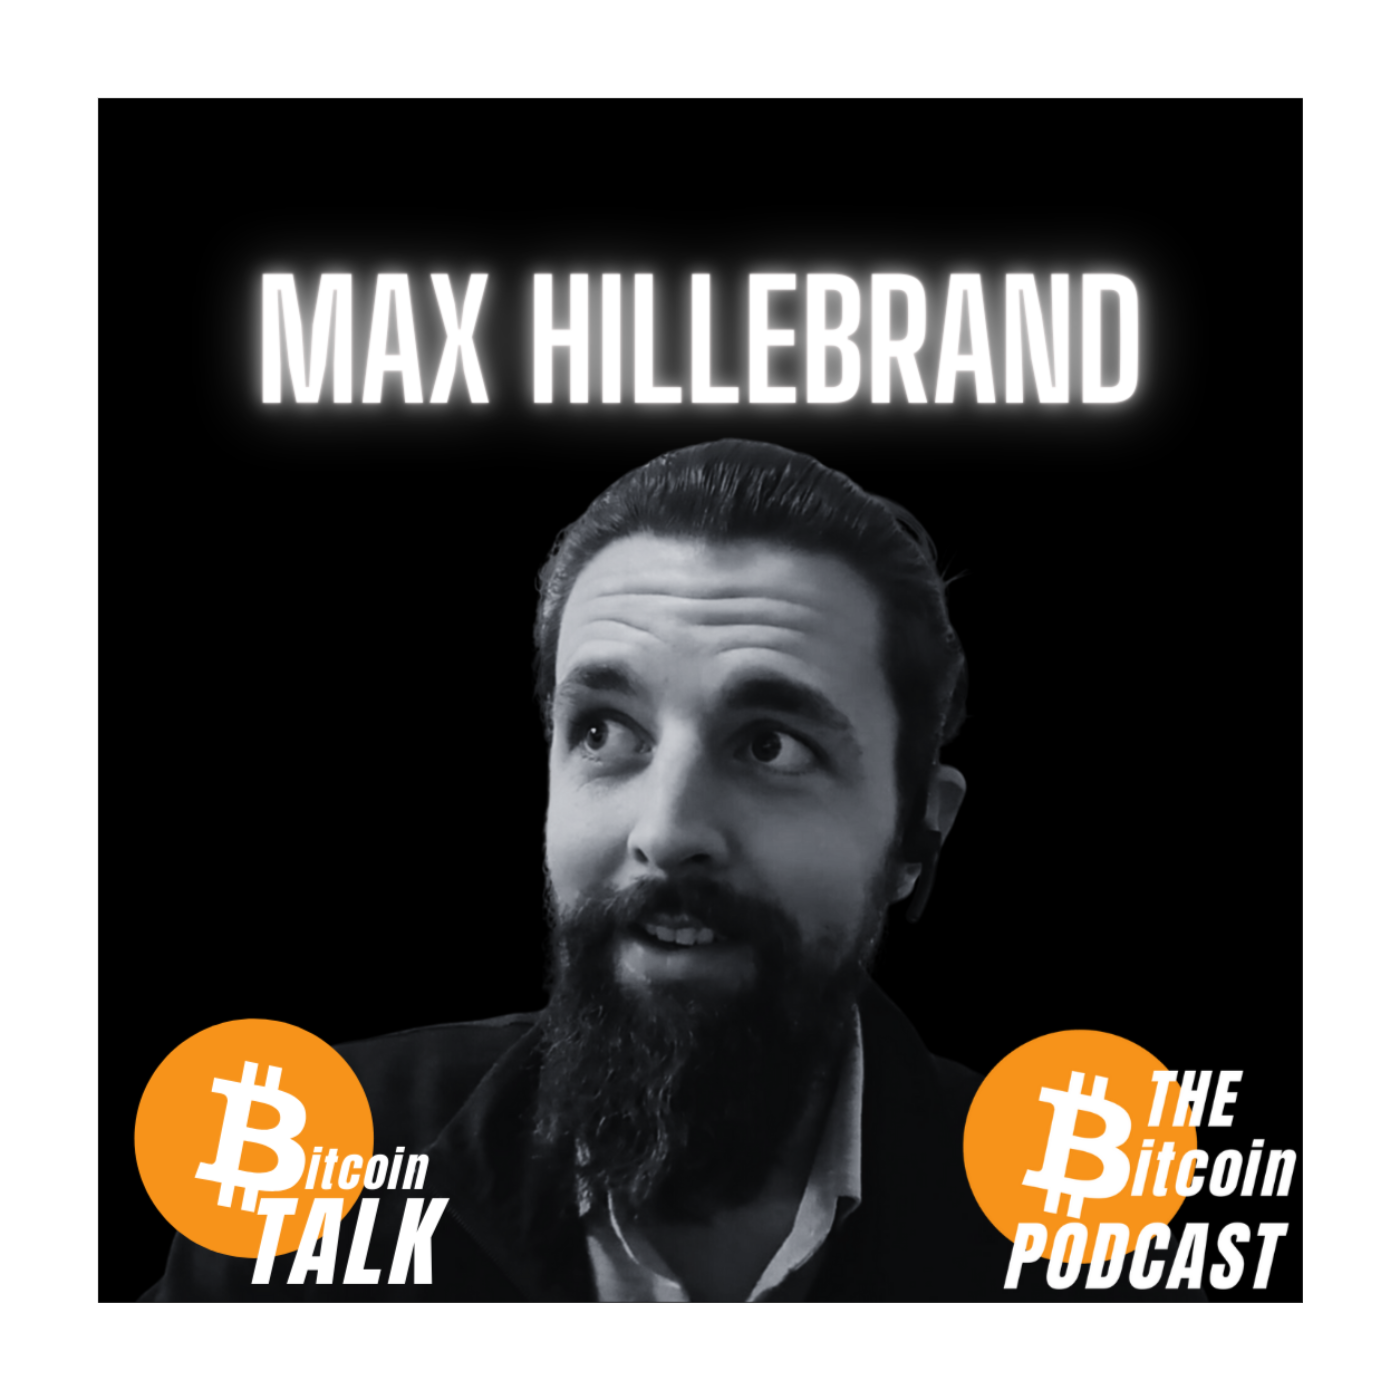 INFLATION, ANARCHY, MORALITY & THE STATE: Max Hillebrand (Bitcoin Talk on THE Bitcoin Podcast)